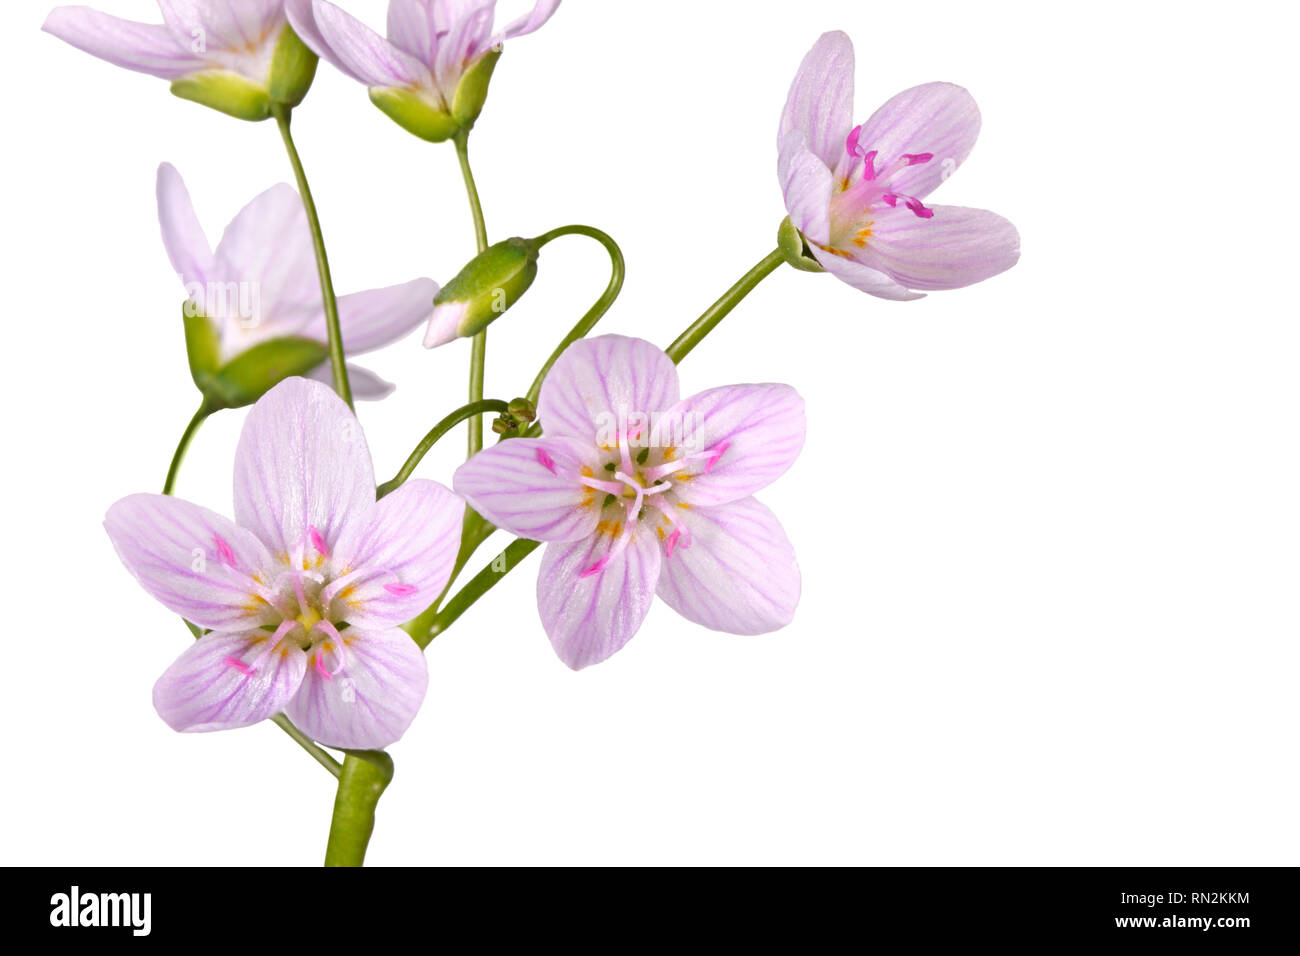 Stem with several open flowers of the spring beauty wildflower (Claytonia virginica) isolated against a white background Stock Photo